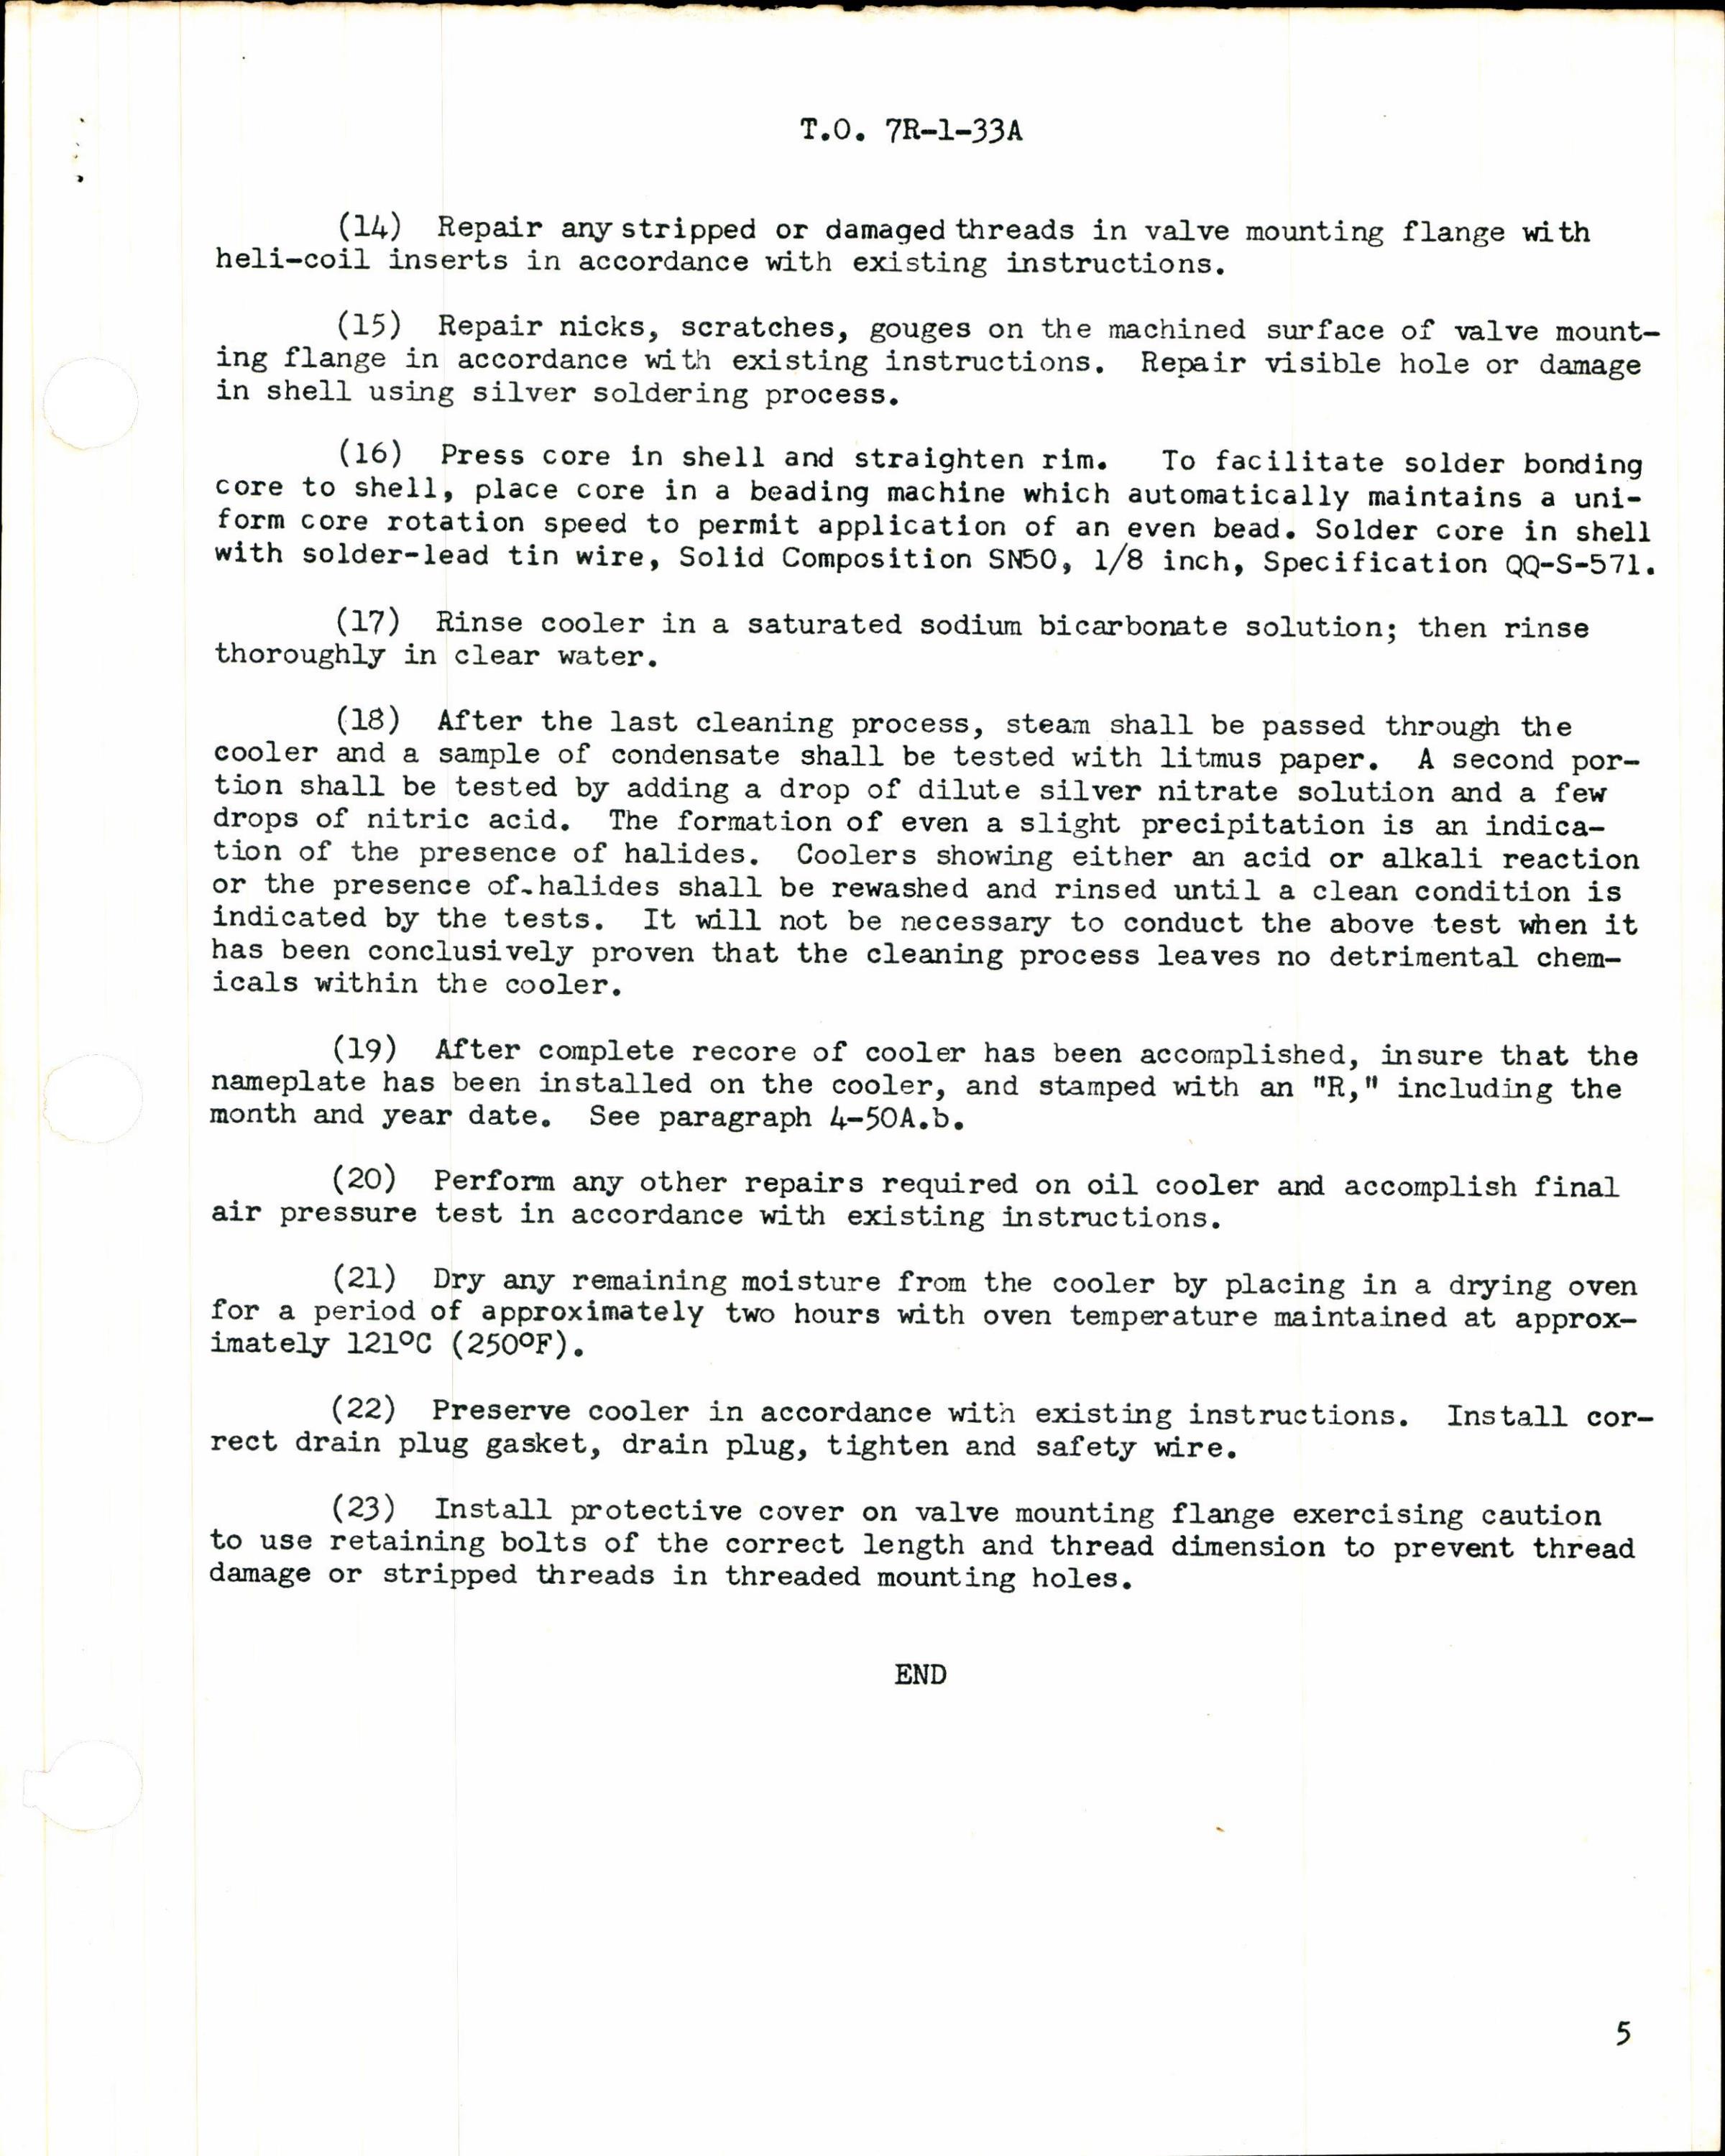 Sample page 5 from AirCorps Library document: Handbook Supplement Overhaul Instructions for Oil Coolers and Control Valves